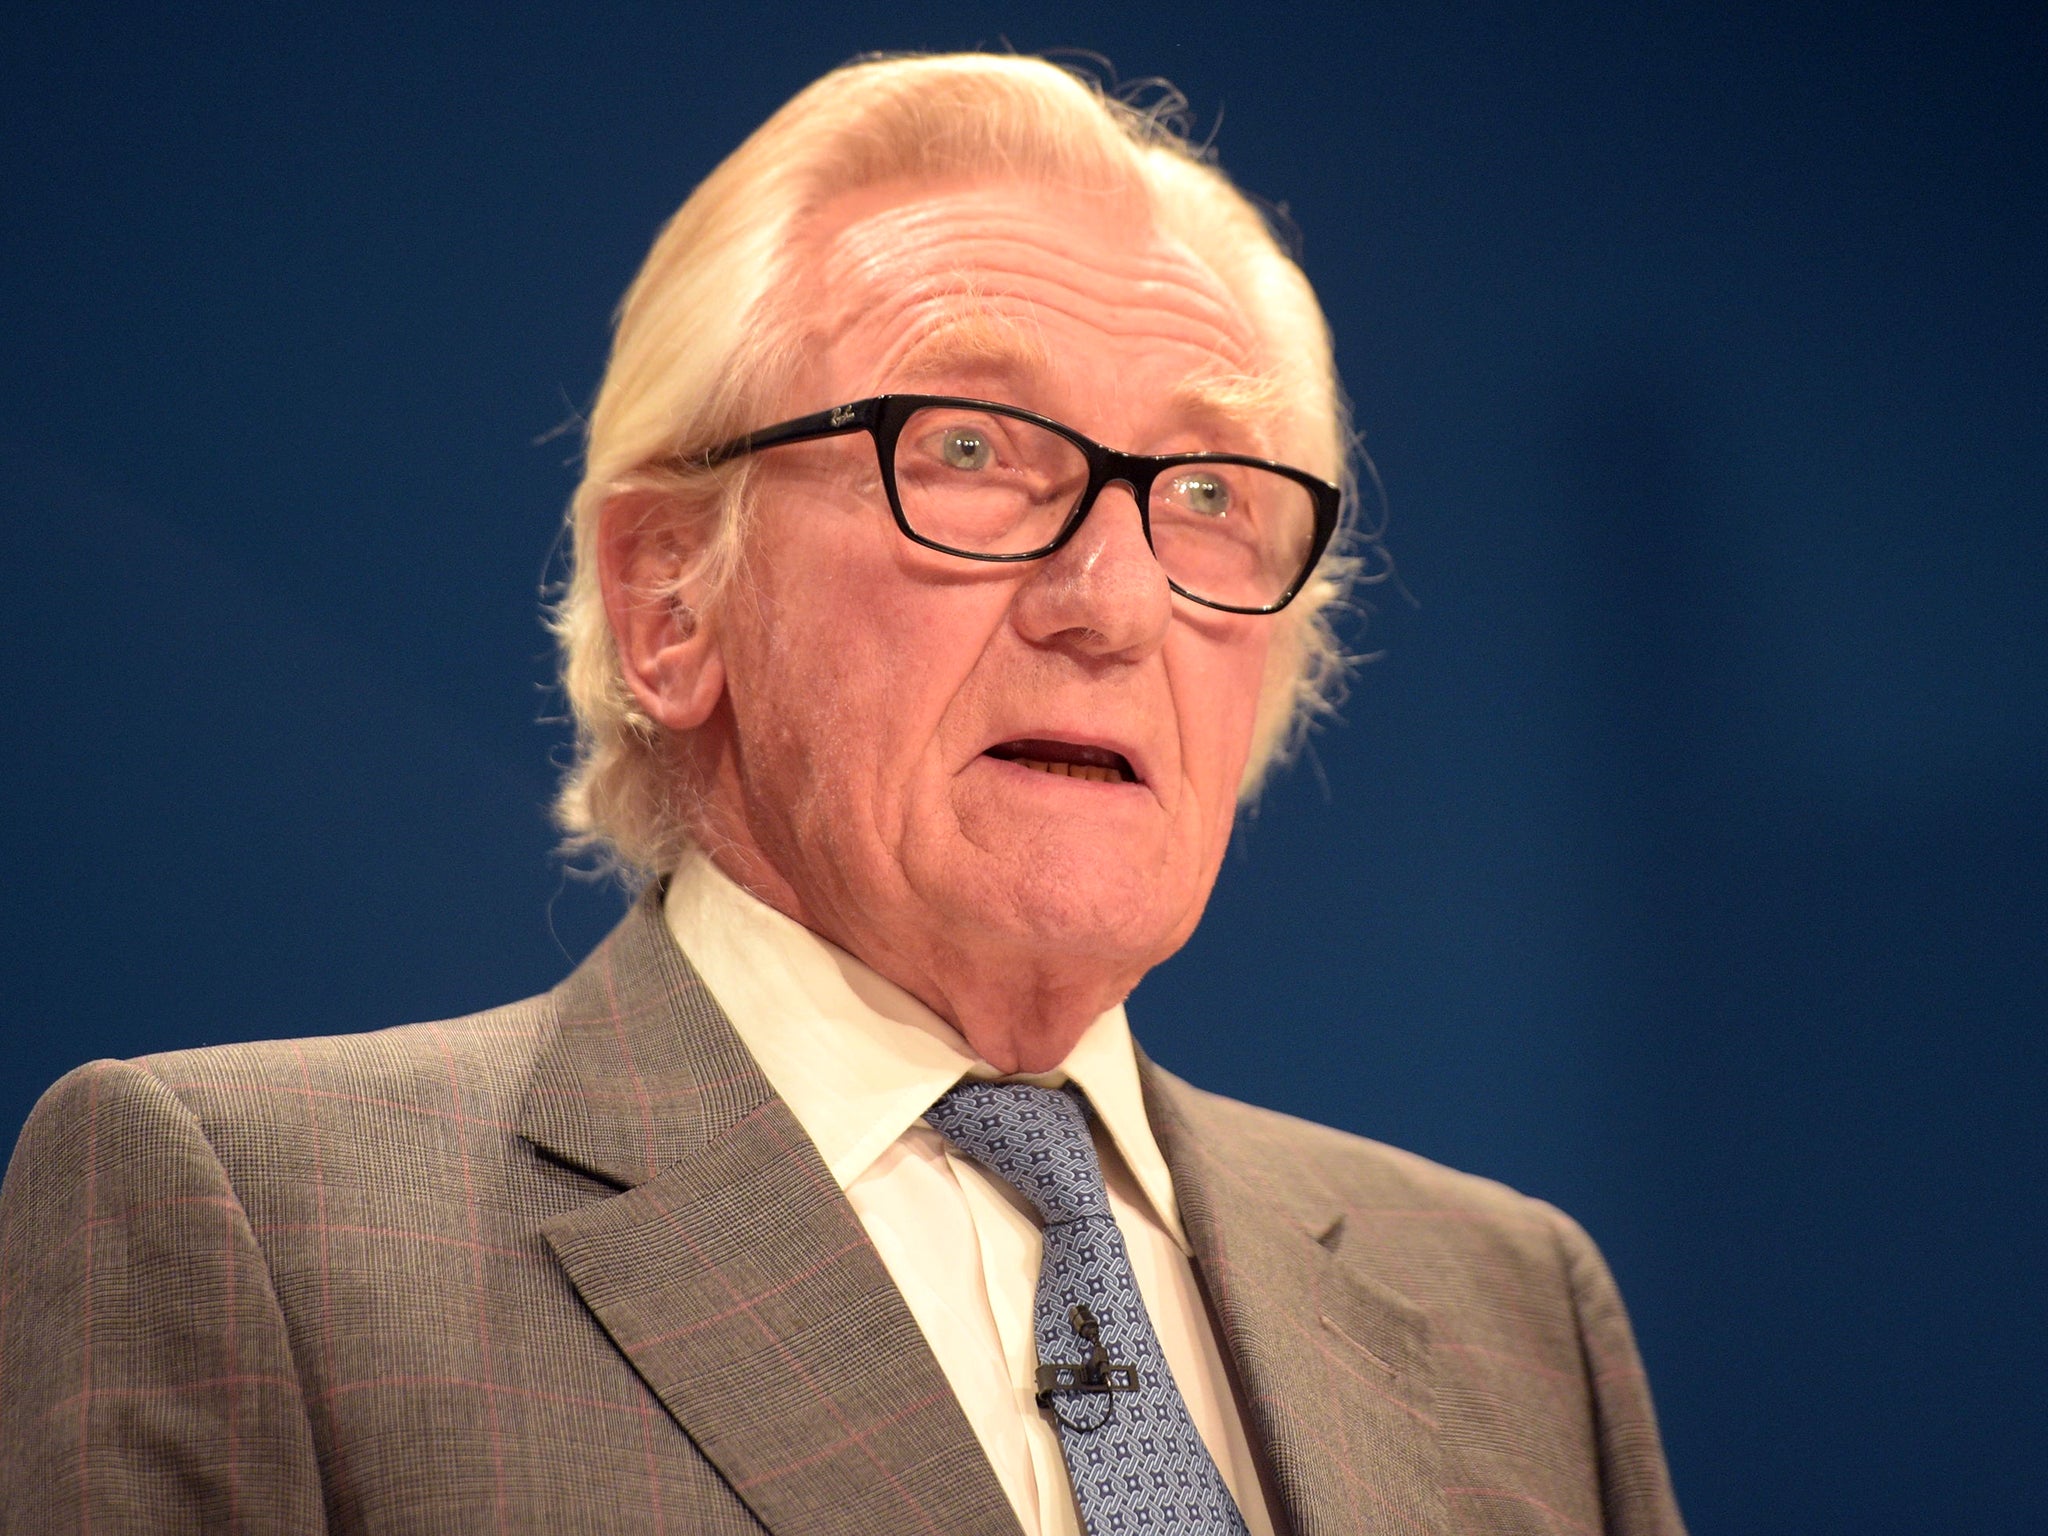 Michael Heseltine’s question is the first he has asked in the Lords for over a year